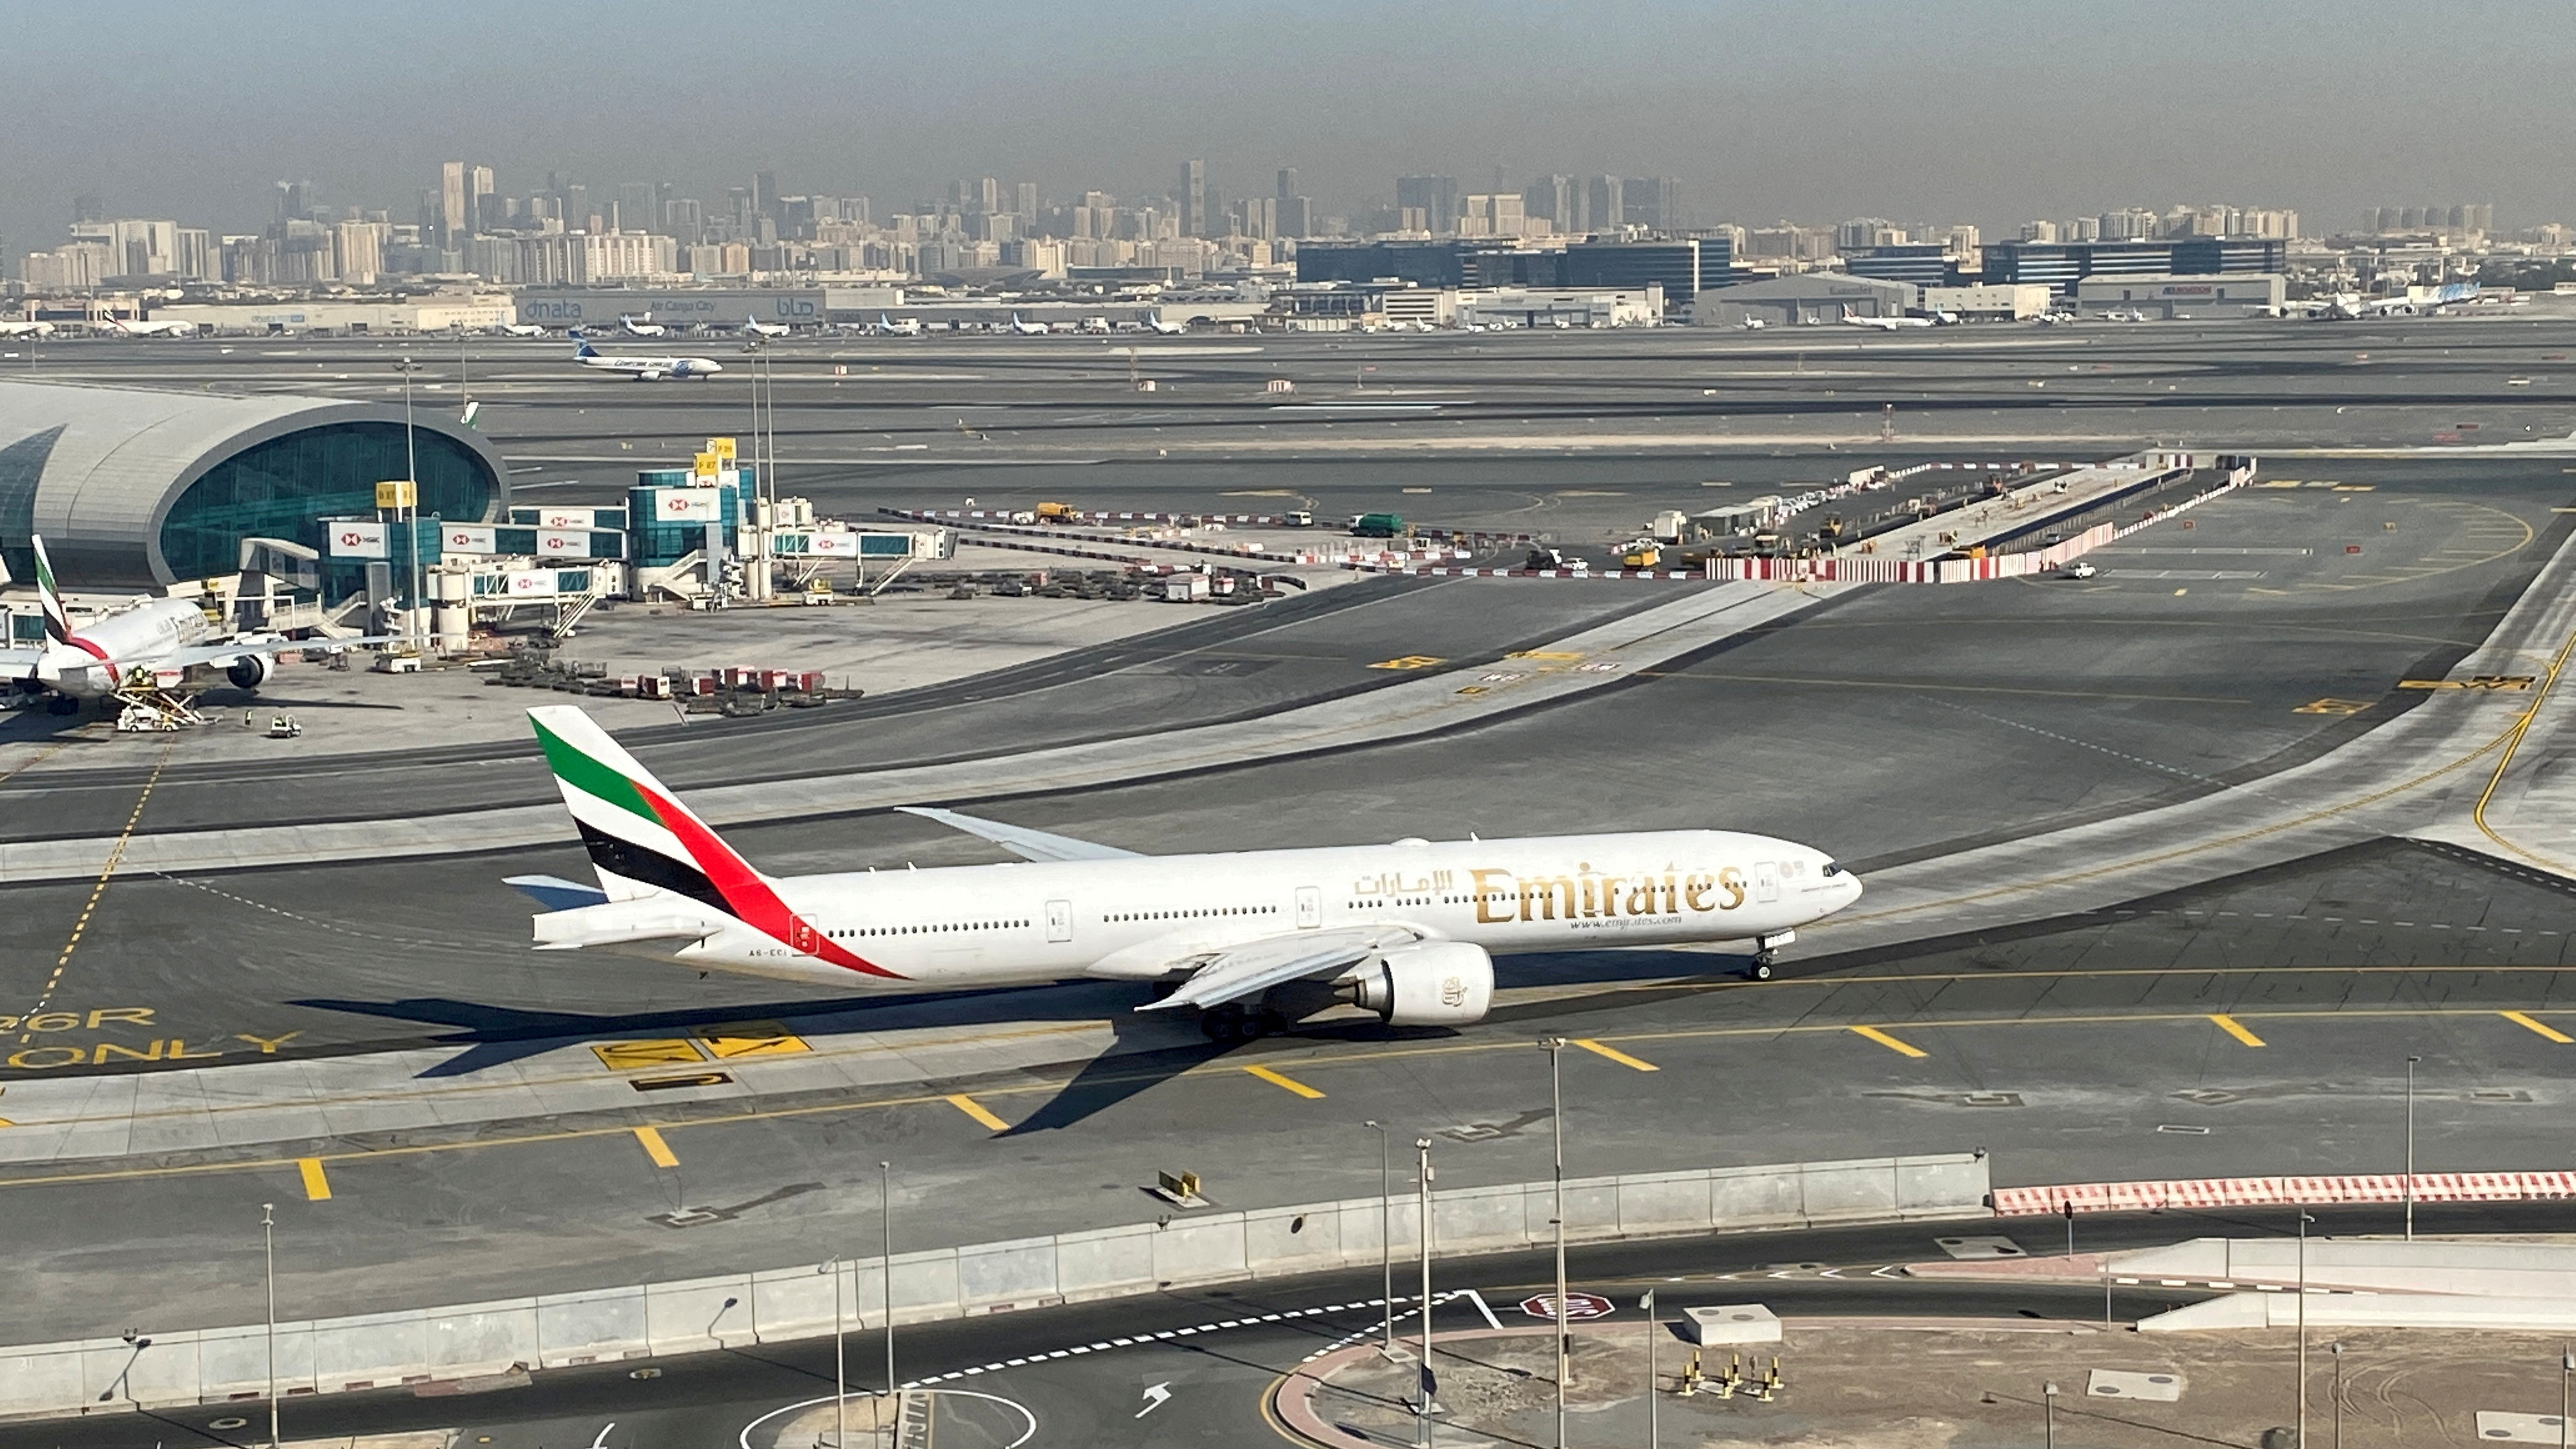 Emirates airliners are seen on the tarmac in a general view of Dubai International Airport in Dubai, United Arab Emirates. /Reuters